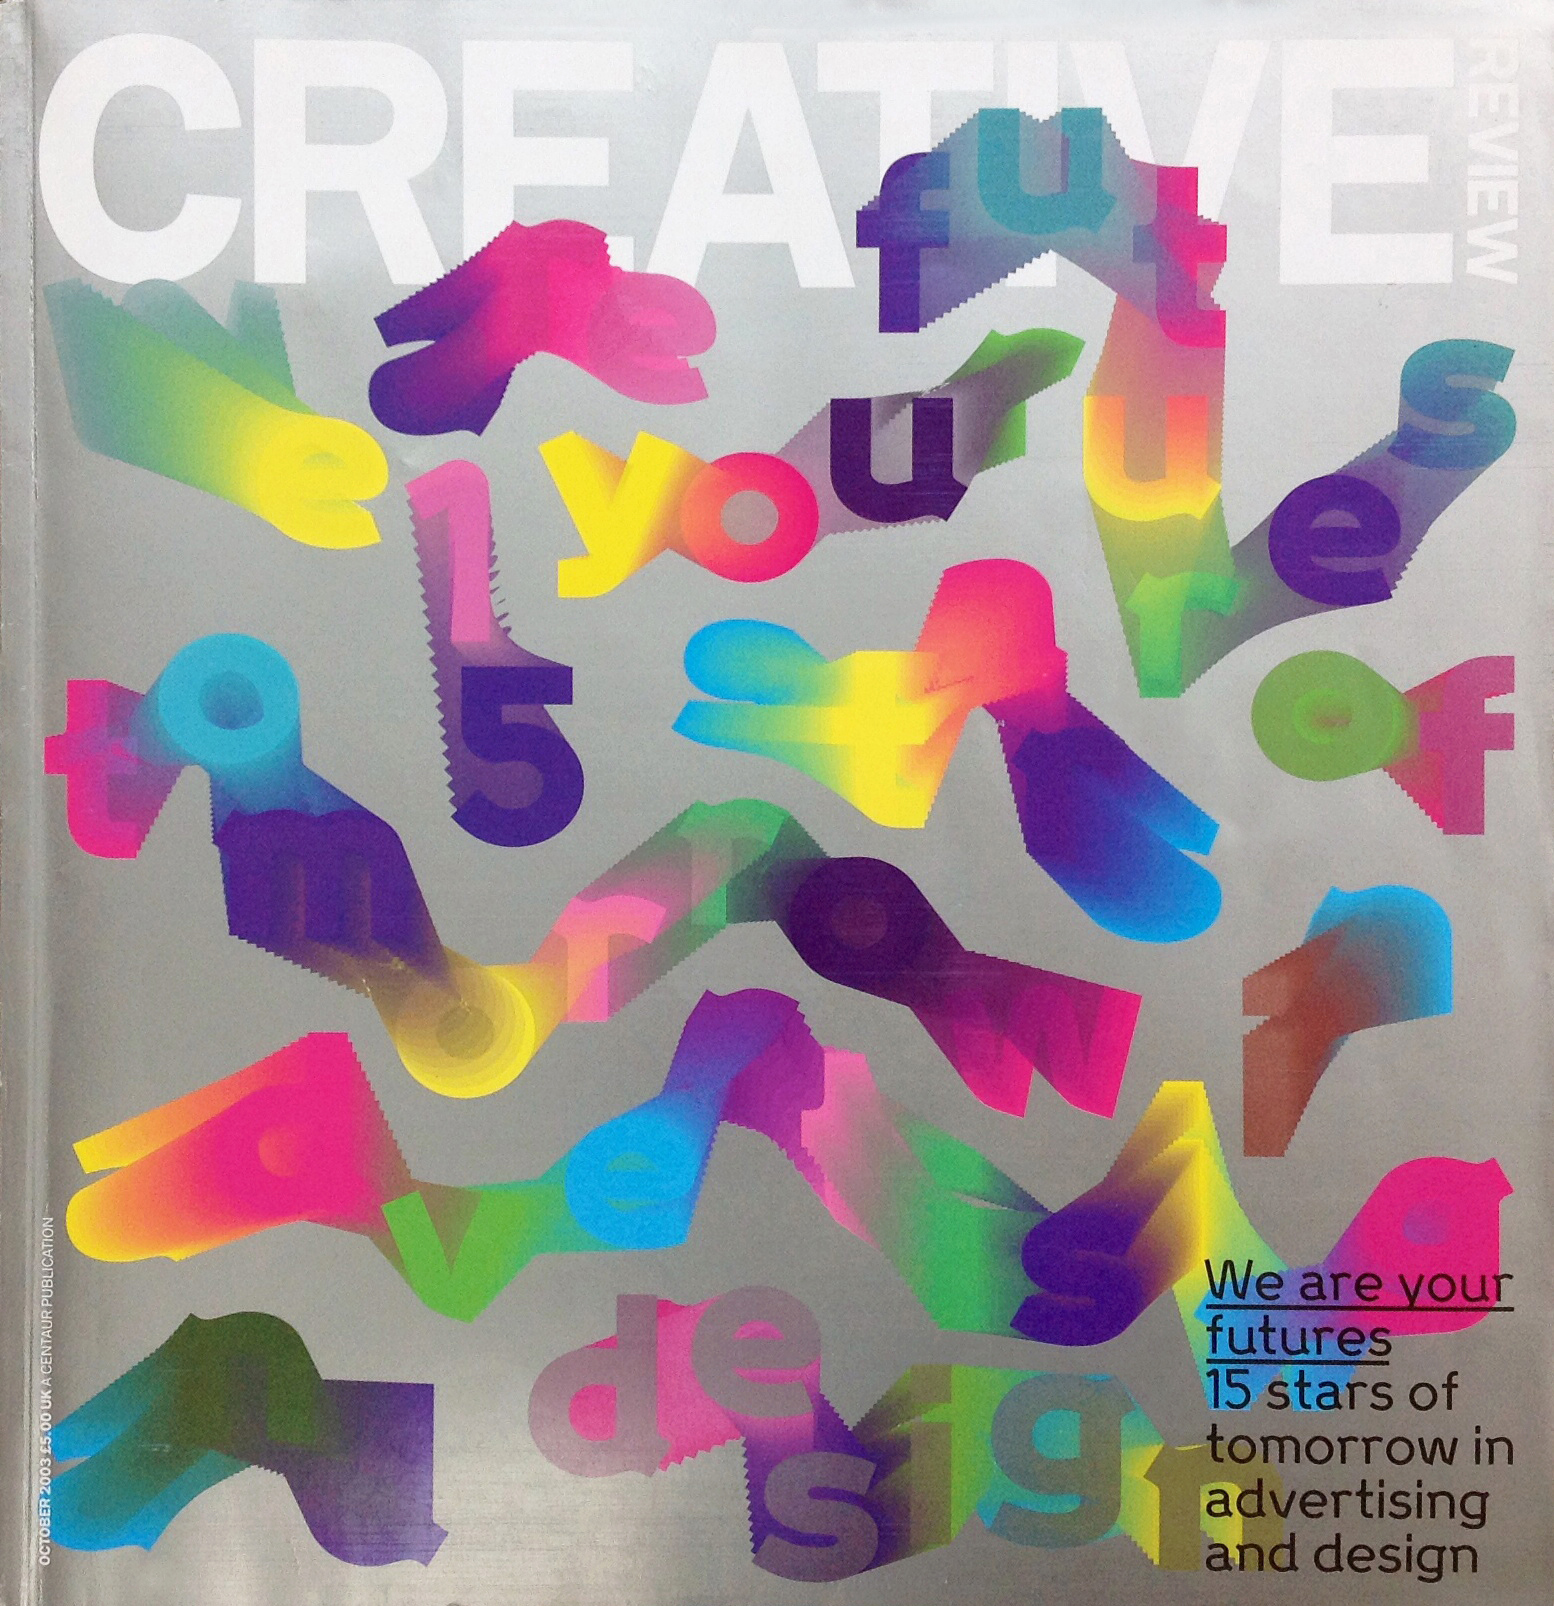 File:Creative Review Oct 2003.jpg